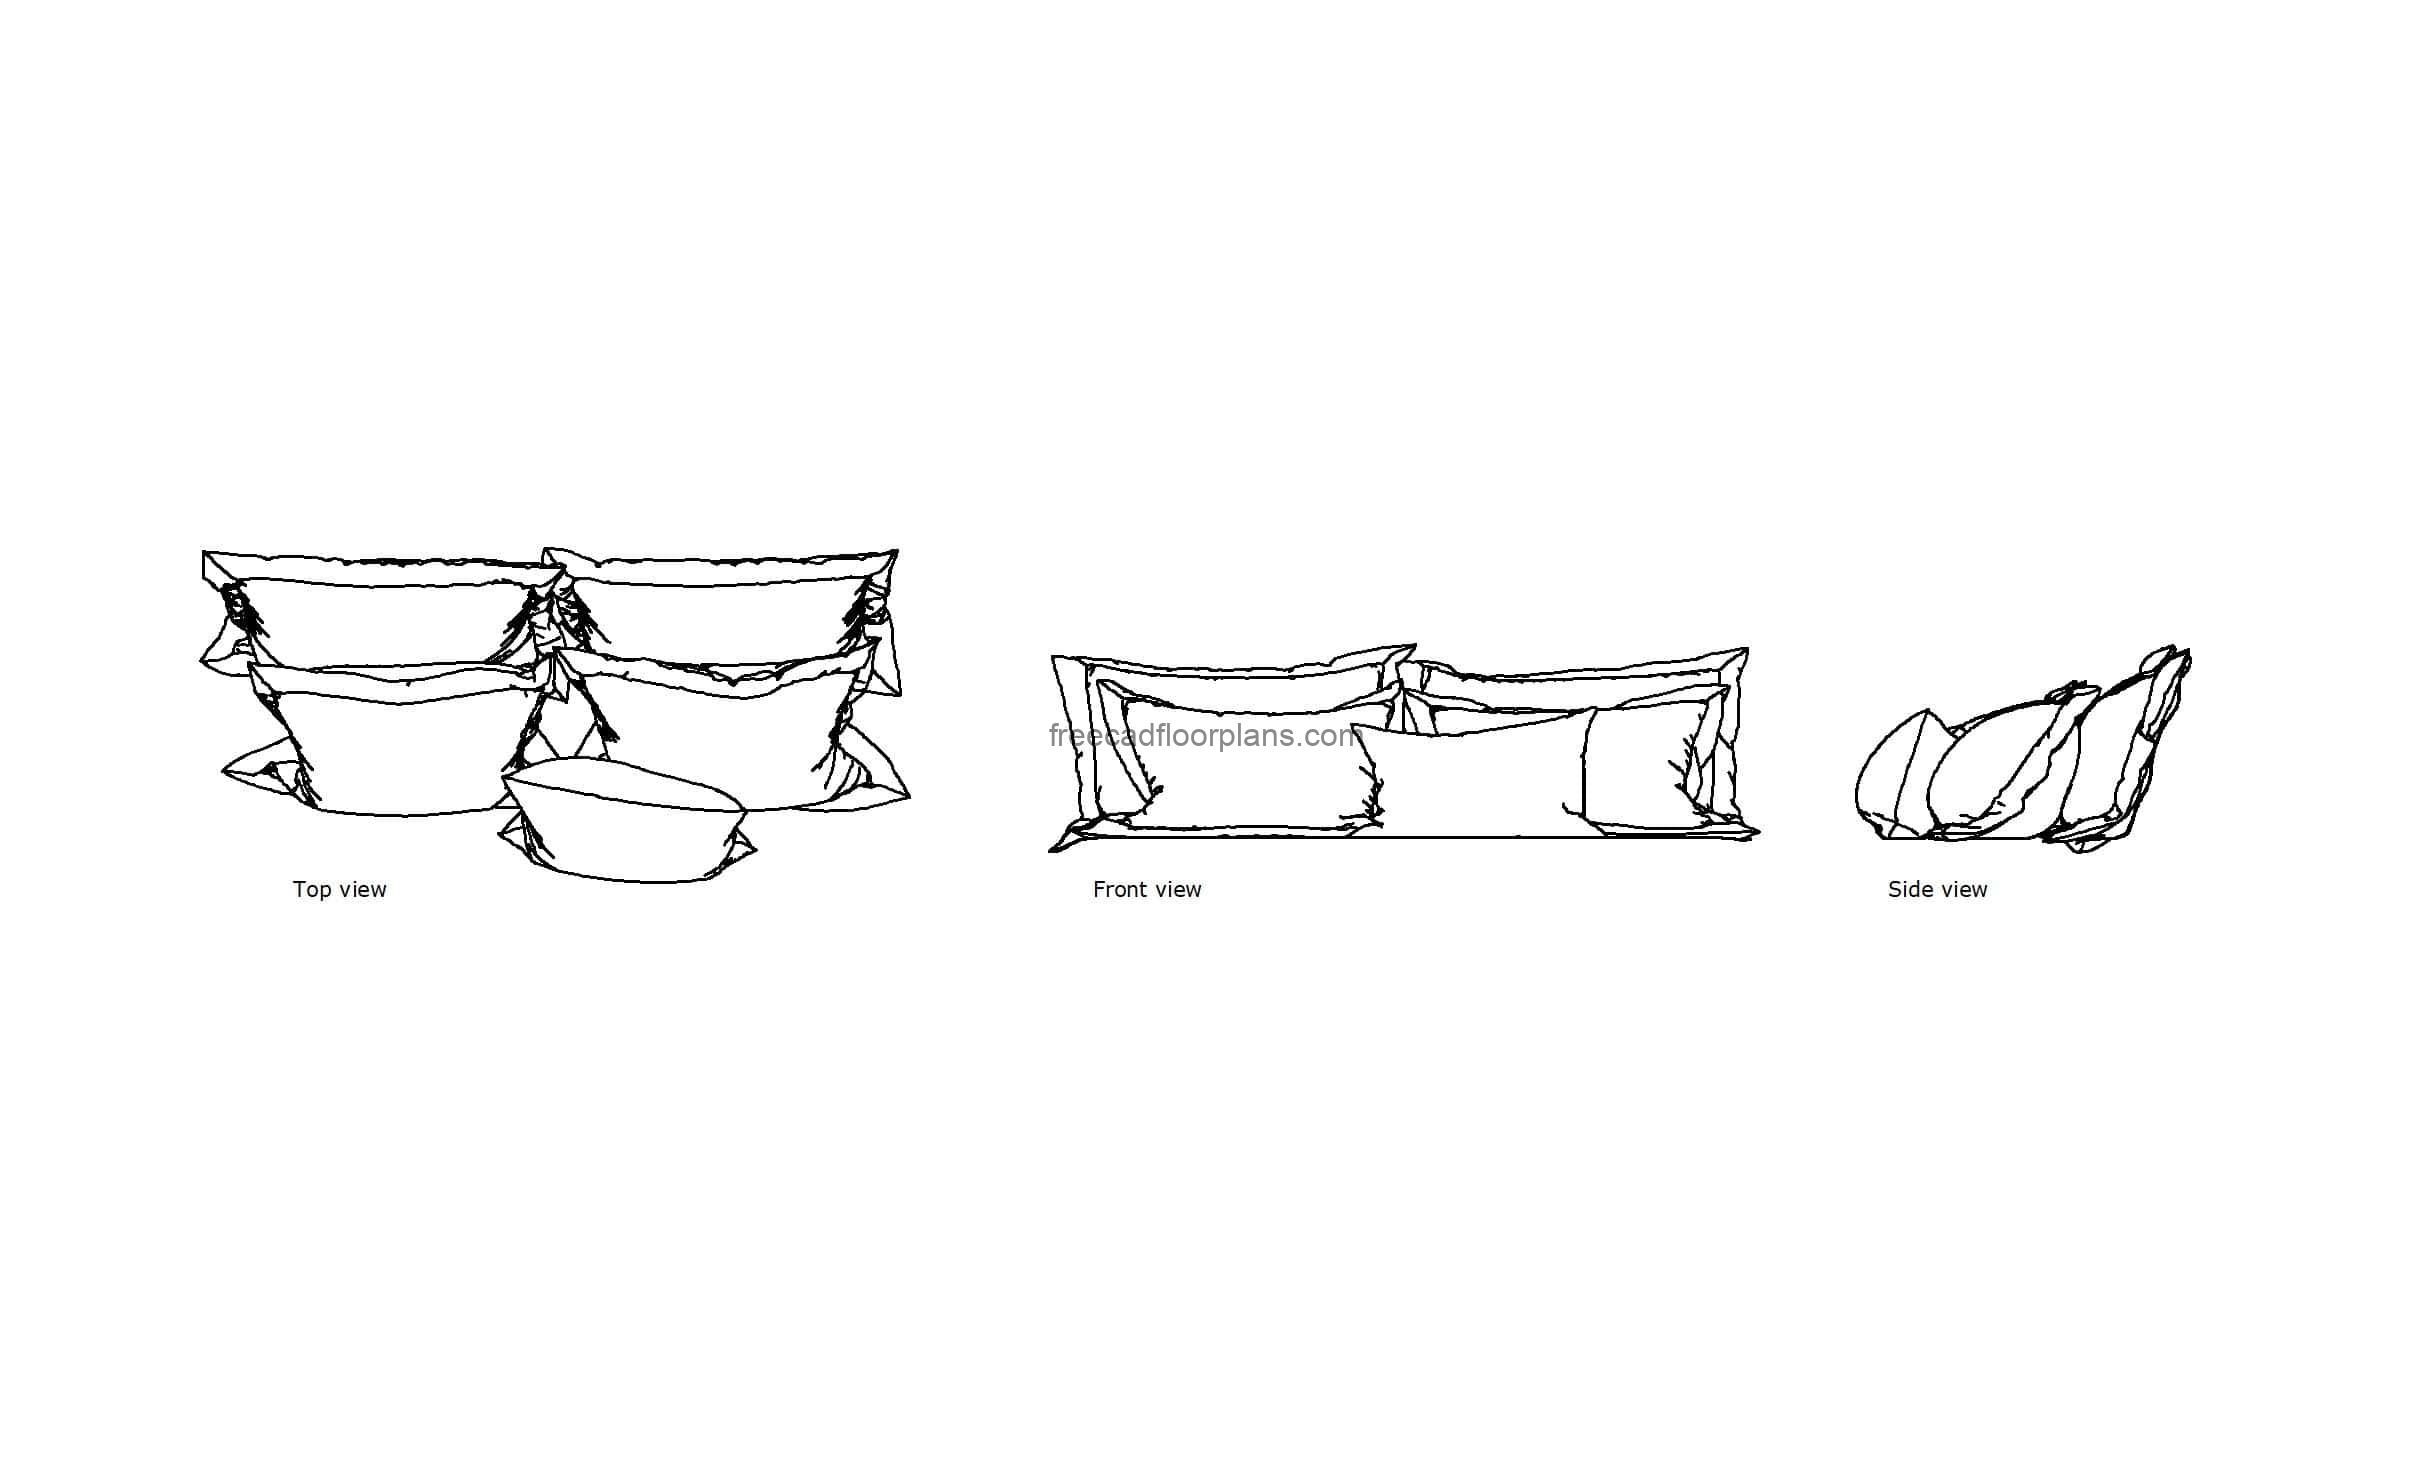 autocad drawing of a group of pillows, plan and elevation 2d views, dwg file free for download